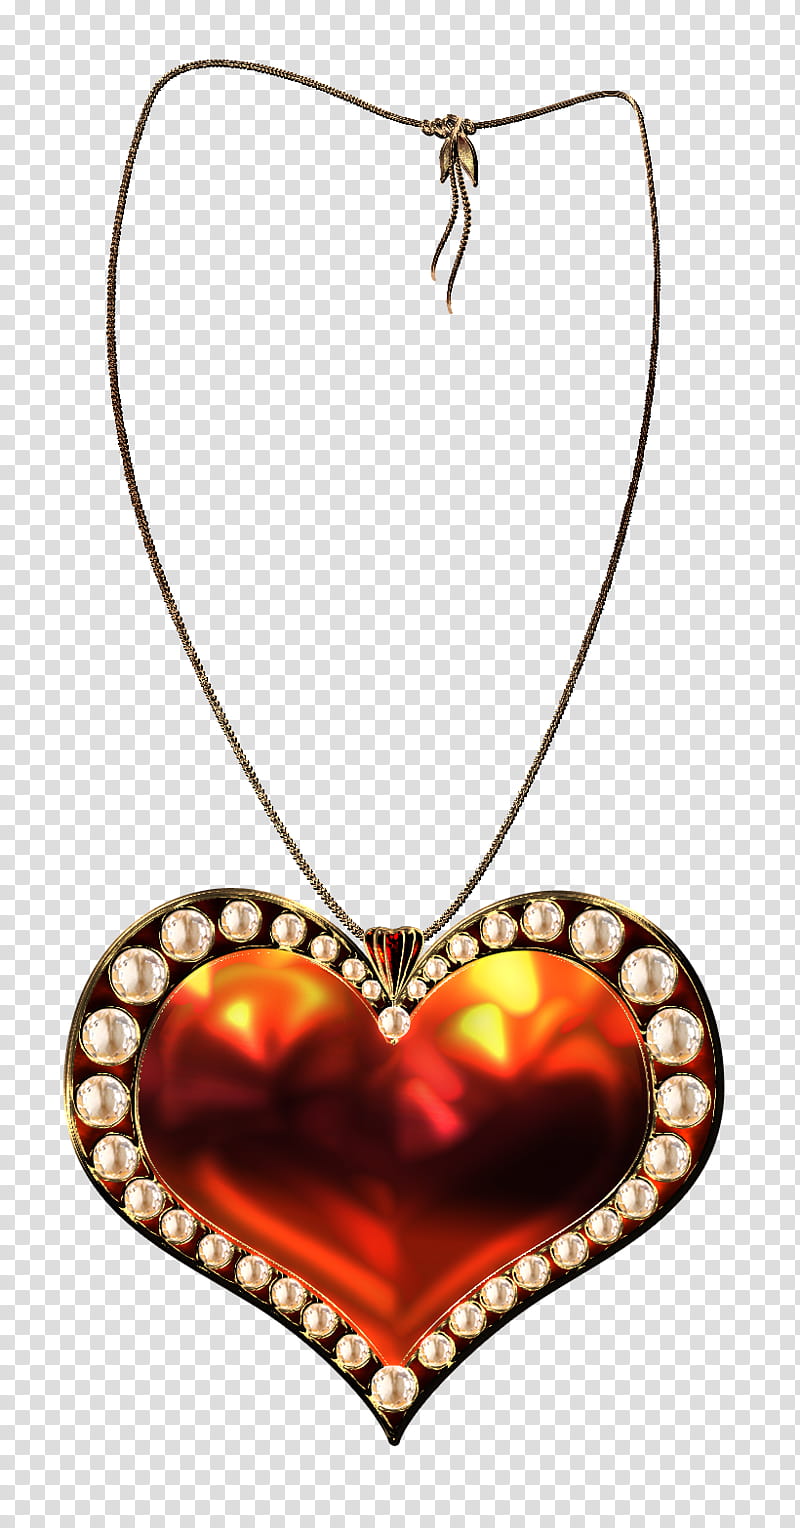 Set jewelry hearts, gold and diamond studded pendant transparent background PNG clipart